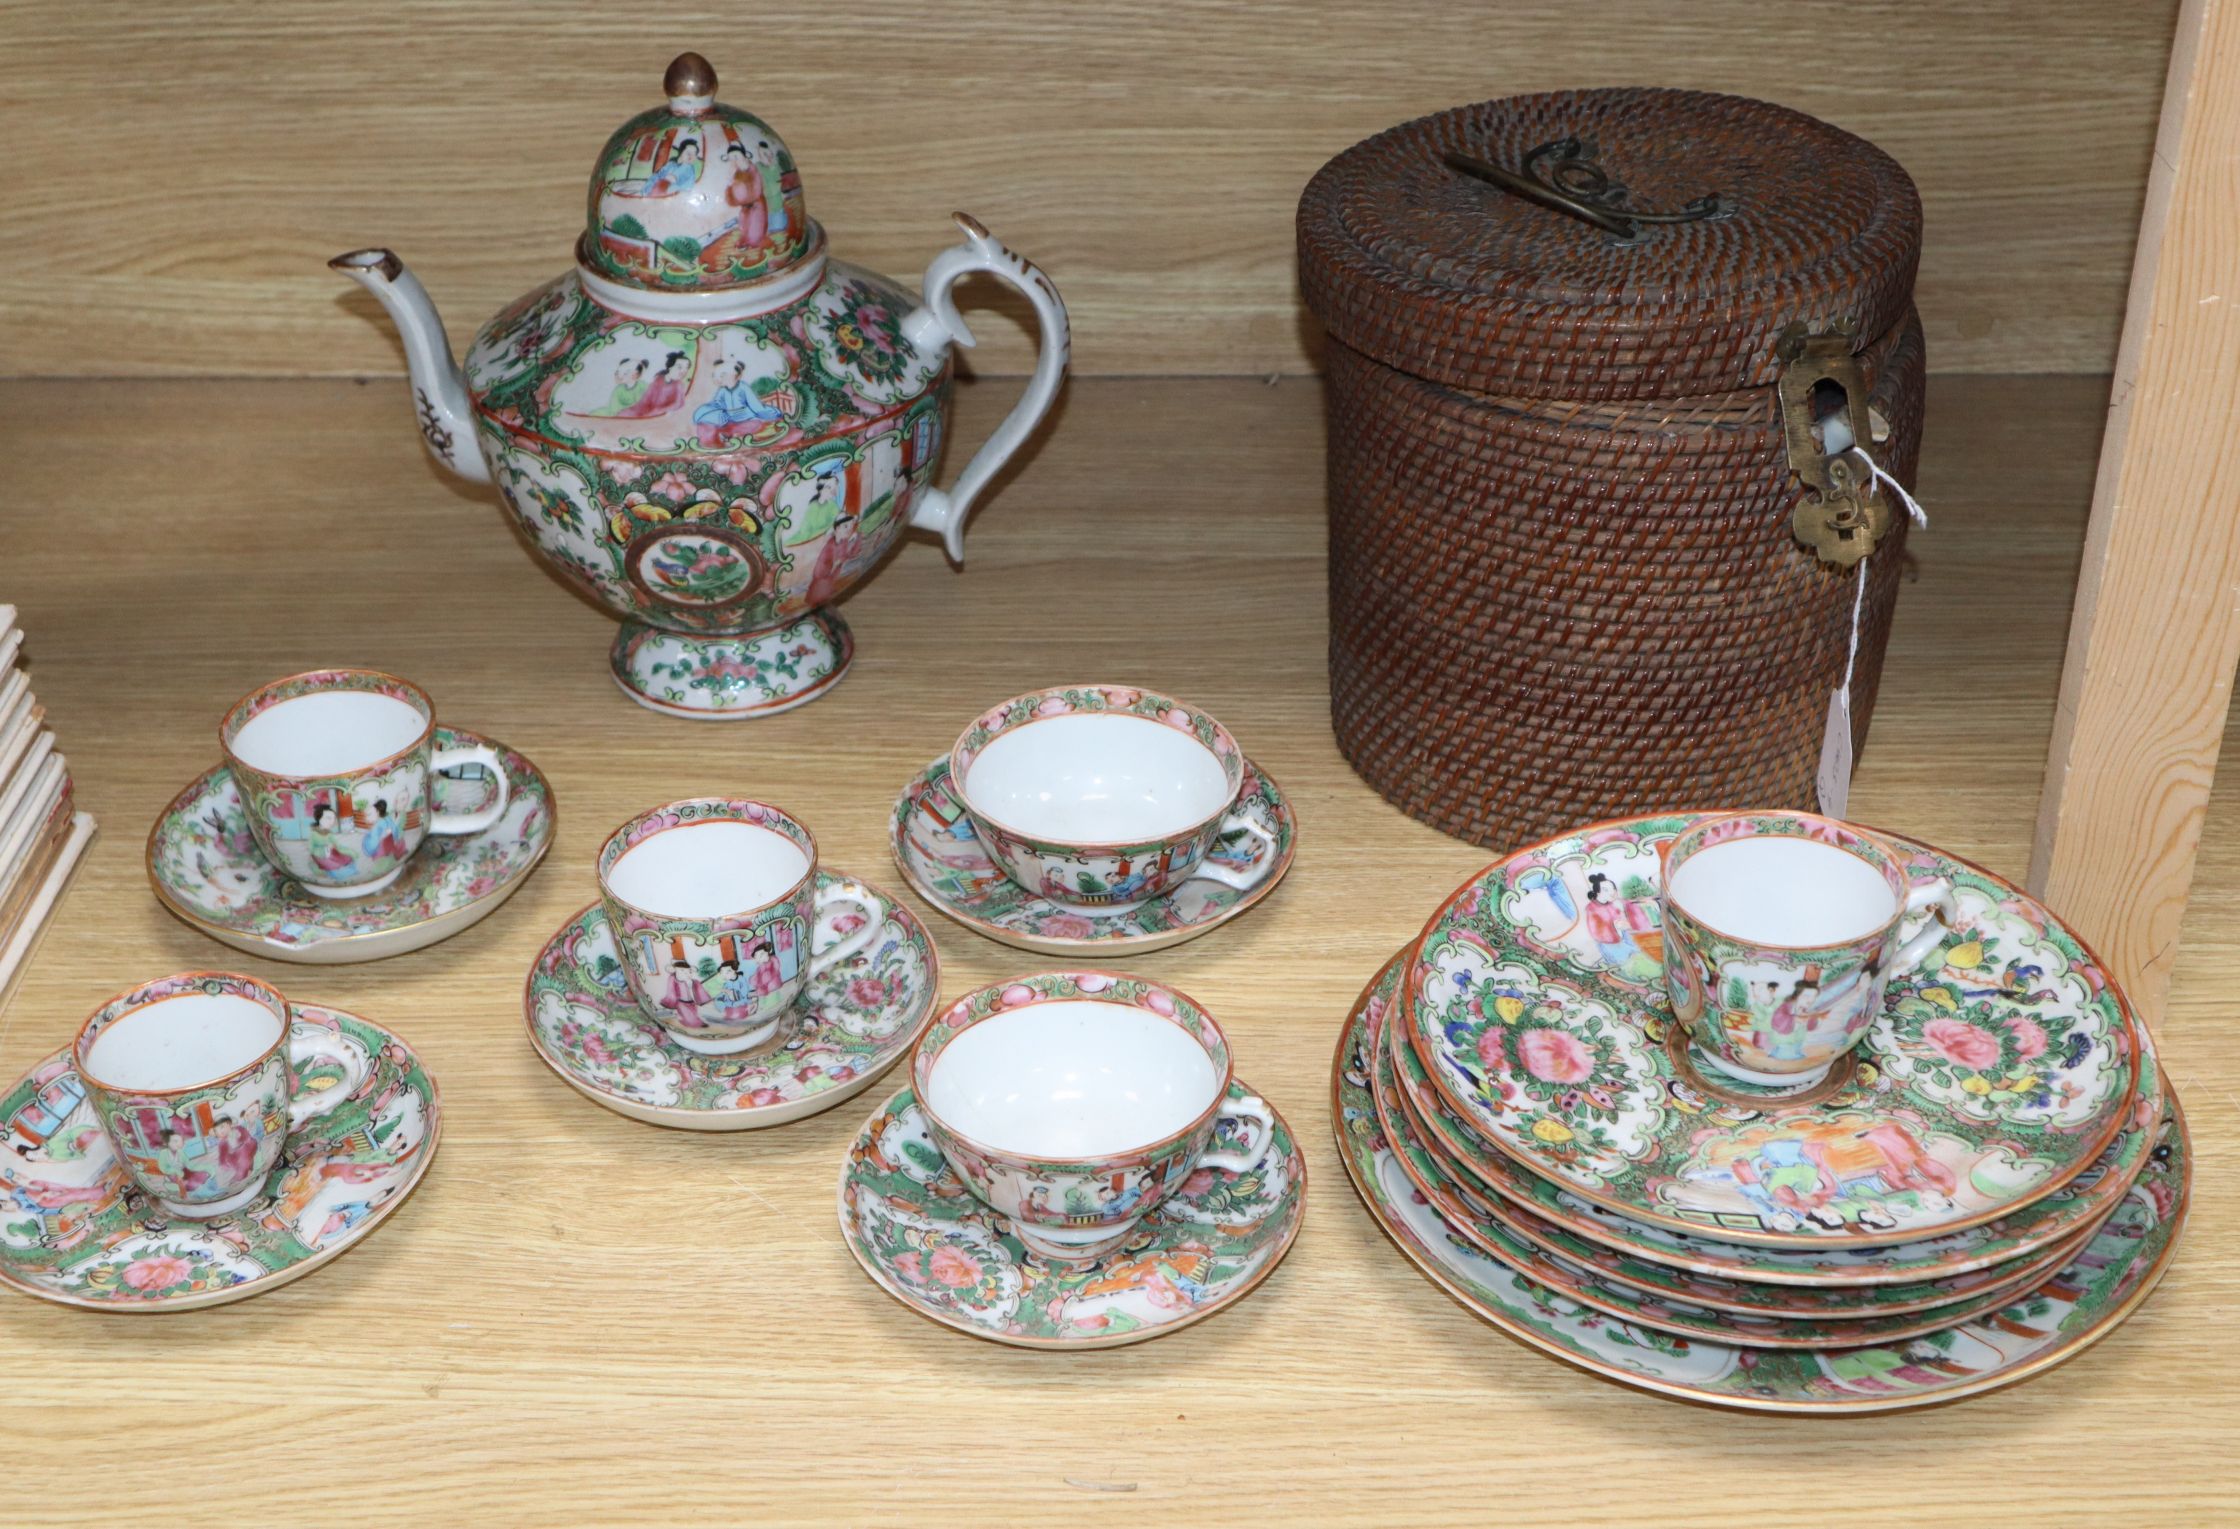 A group of 19th century Chinese famille rose tea wares including a teapot in a basket